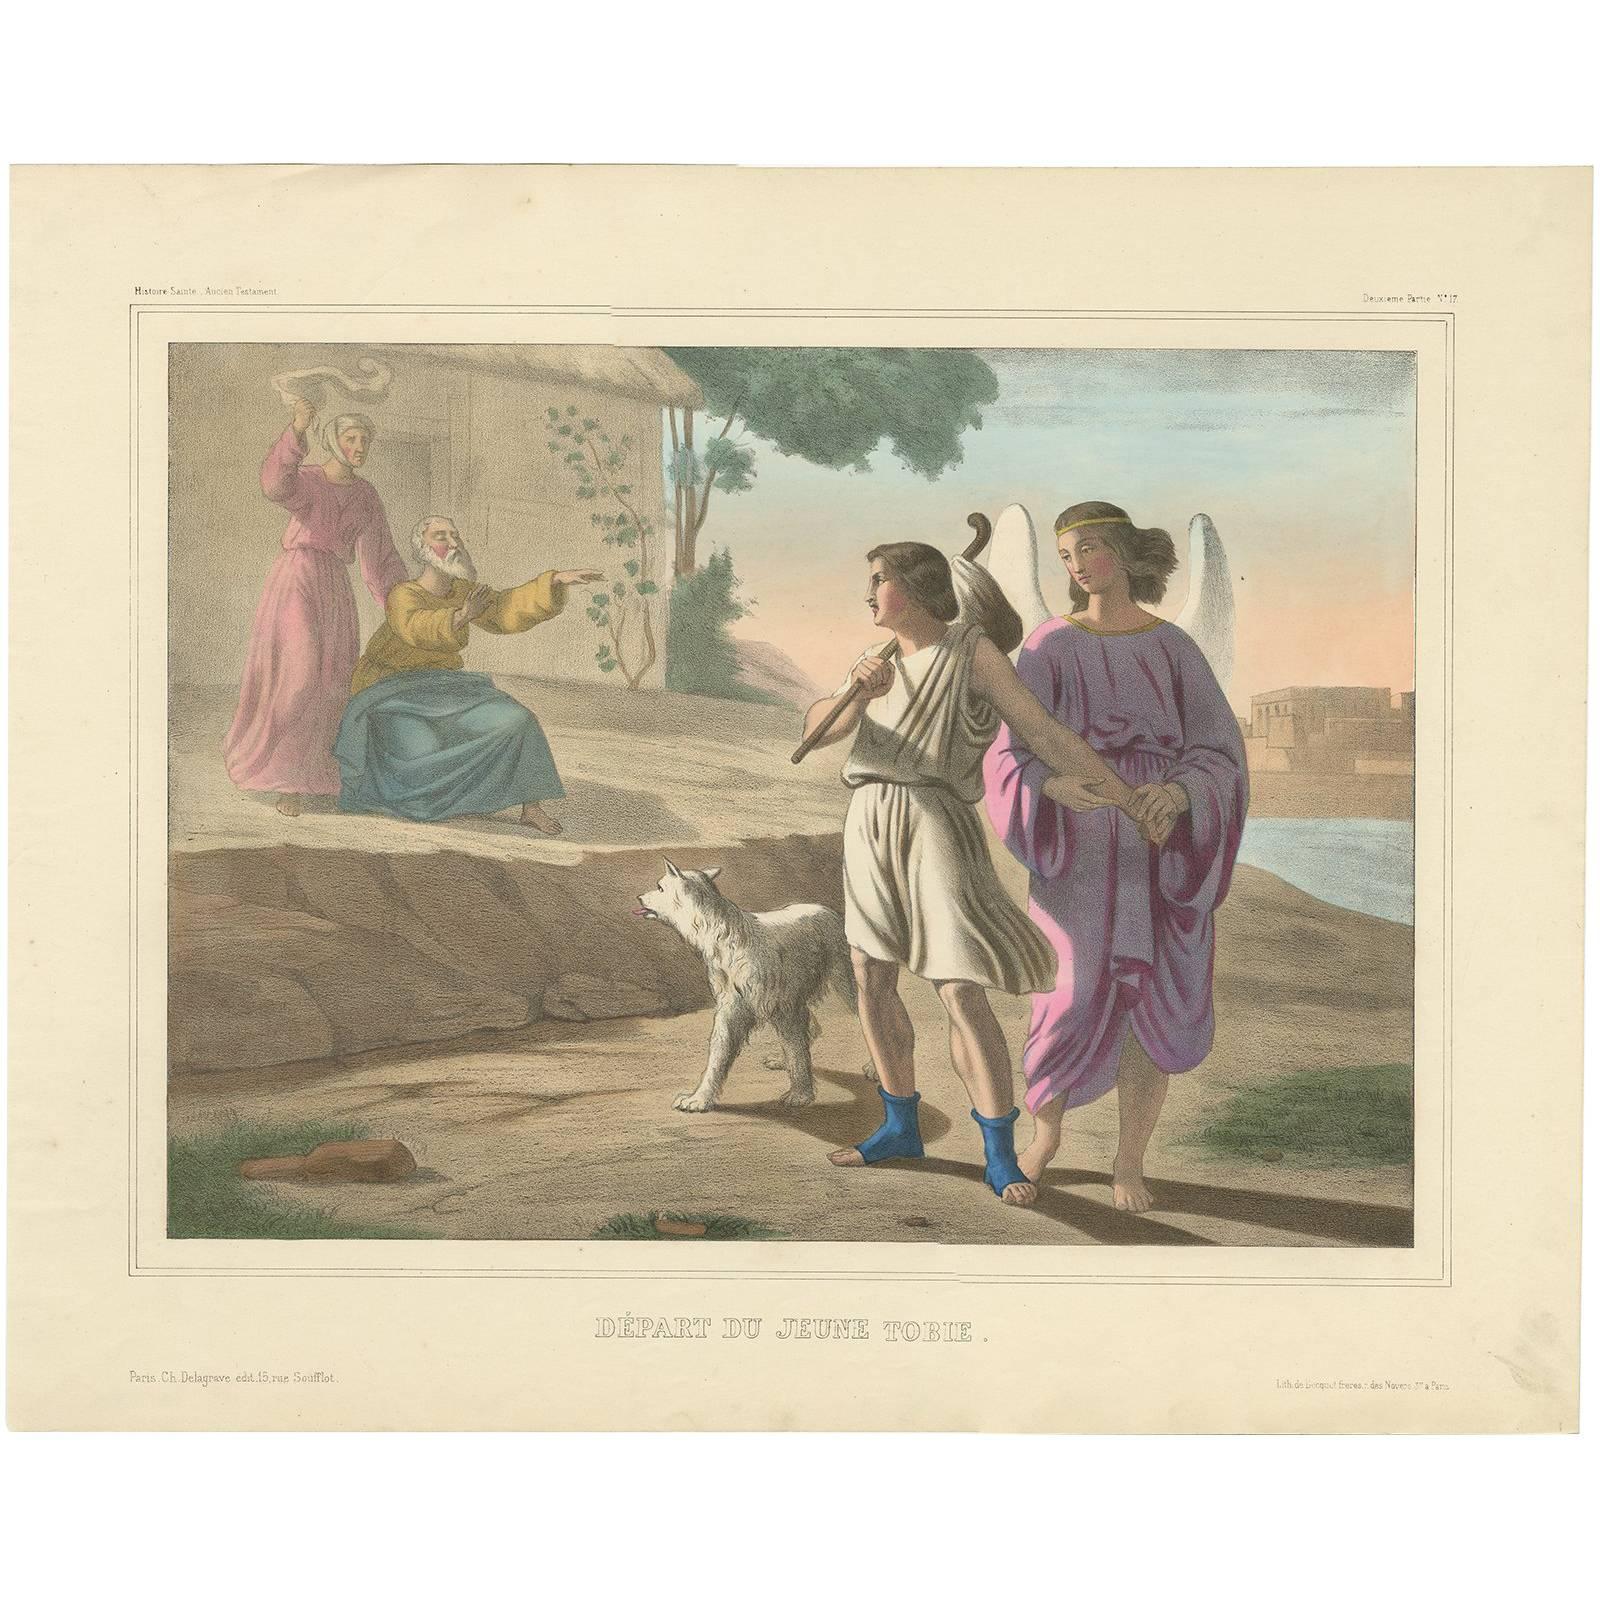 Antique Religious Print 'No. 17' The Departure of Young Tobias, circa 1840 For Sale